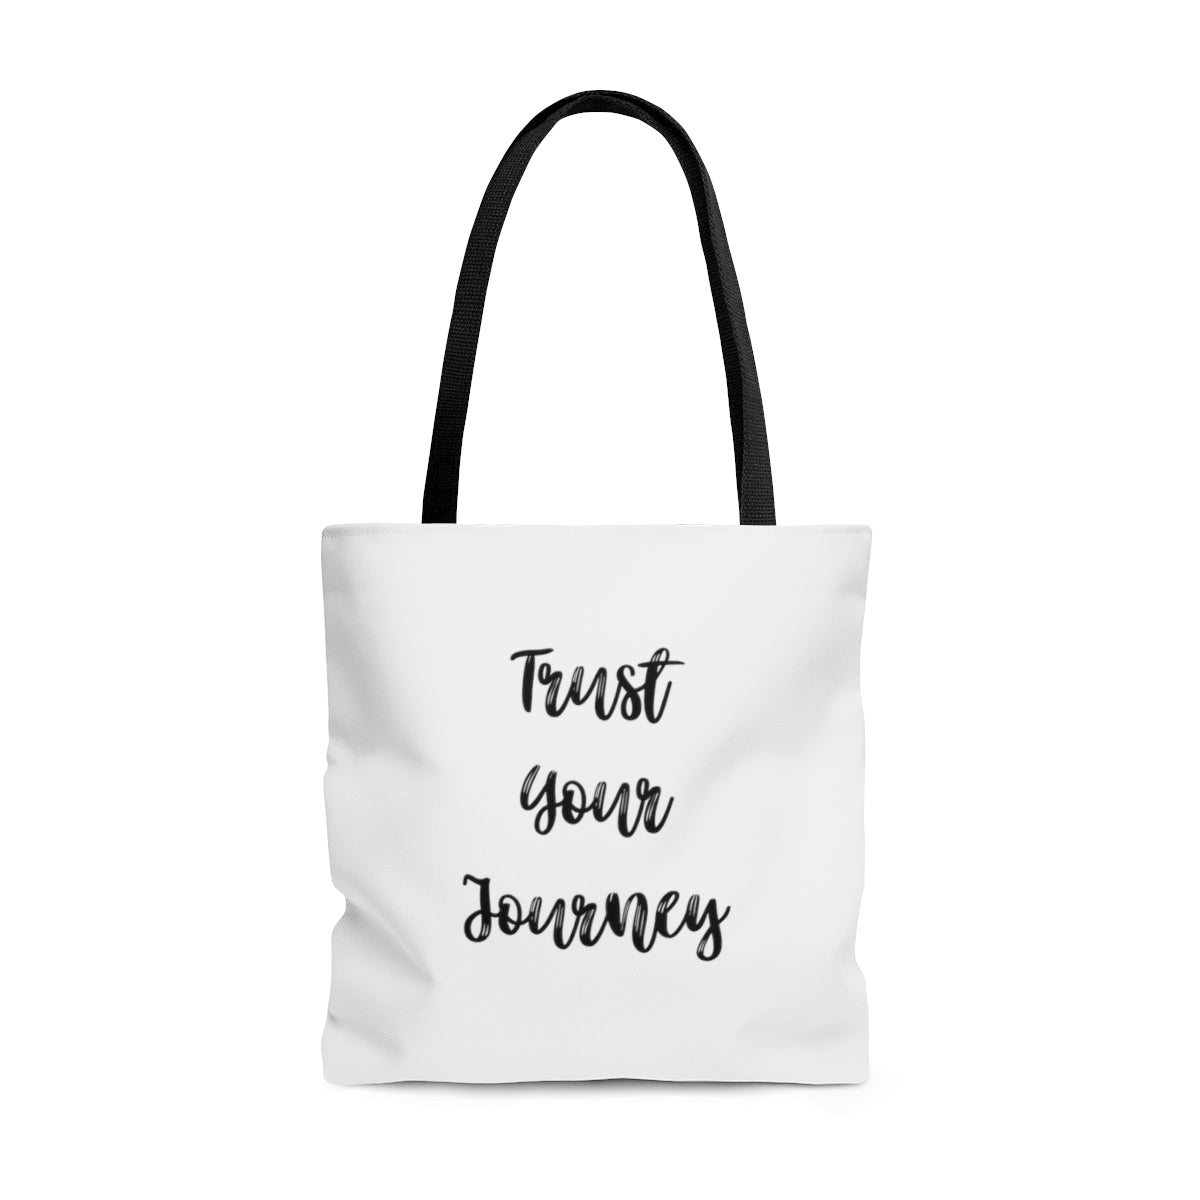 Trust Your Journey Durable Motivational Tote Bag- Inspirational Tote Bag, Laptop Tote Bag, Office Tote Bag, Self-Care Gift Tote Bag, Tote Purse